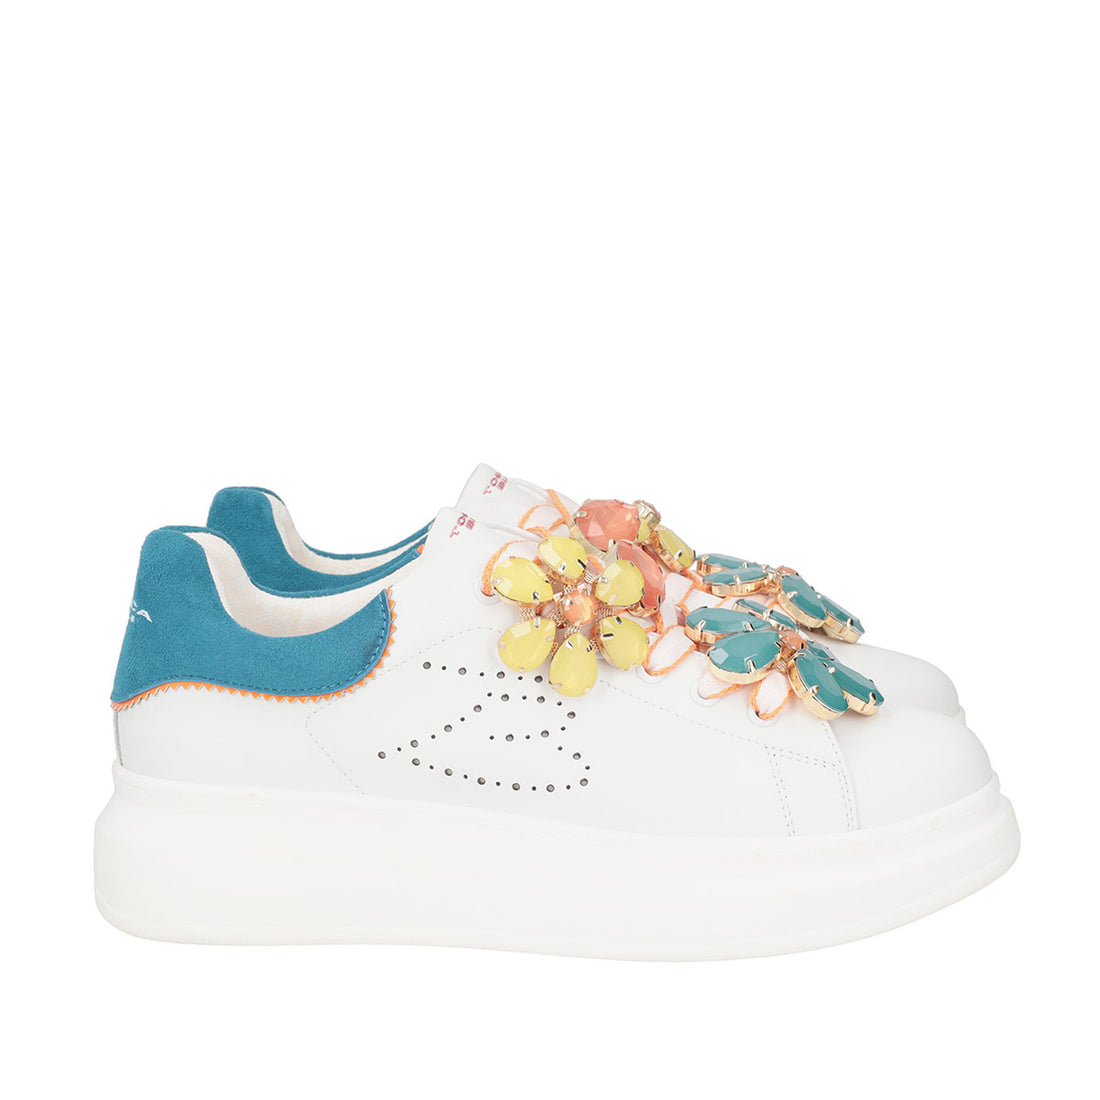 WHITE/TURQUOISE GLAMOUR SNEAKER IN LEATHER WITH JEWEL FLOWERS